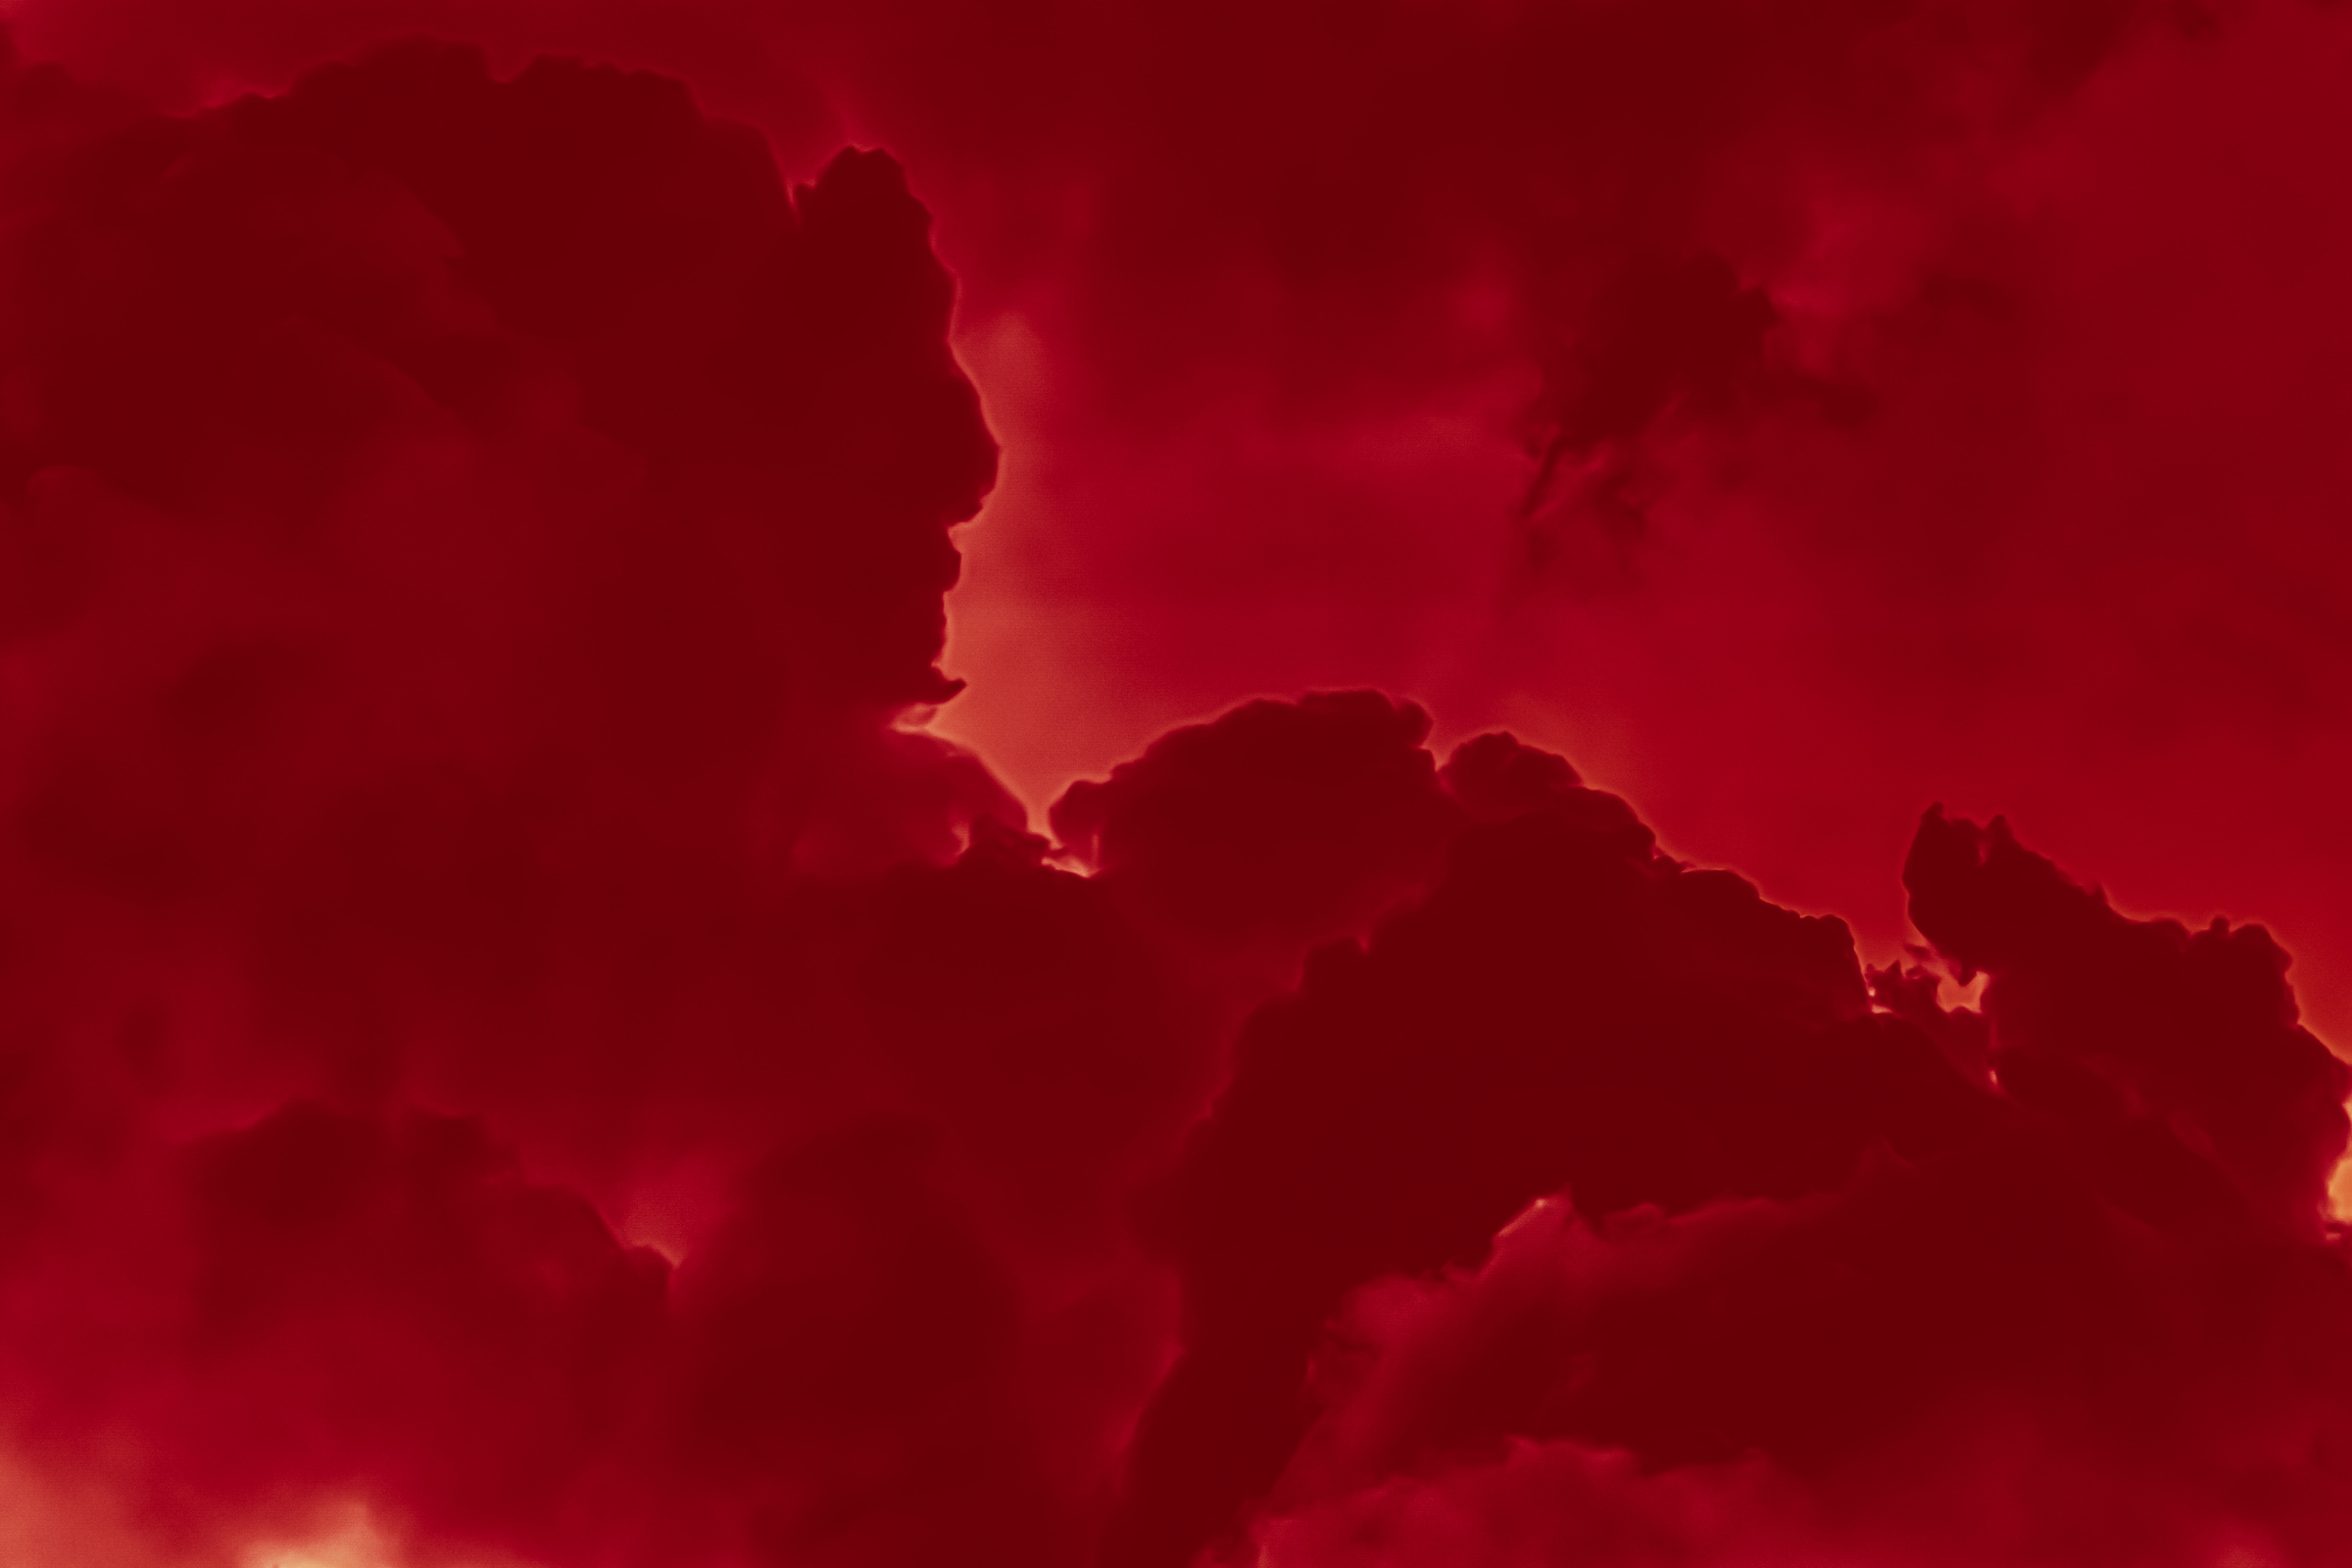 Hot Fire Flames or Red Clouds as Minimalistic Background Design